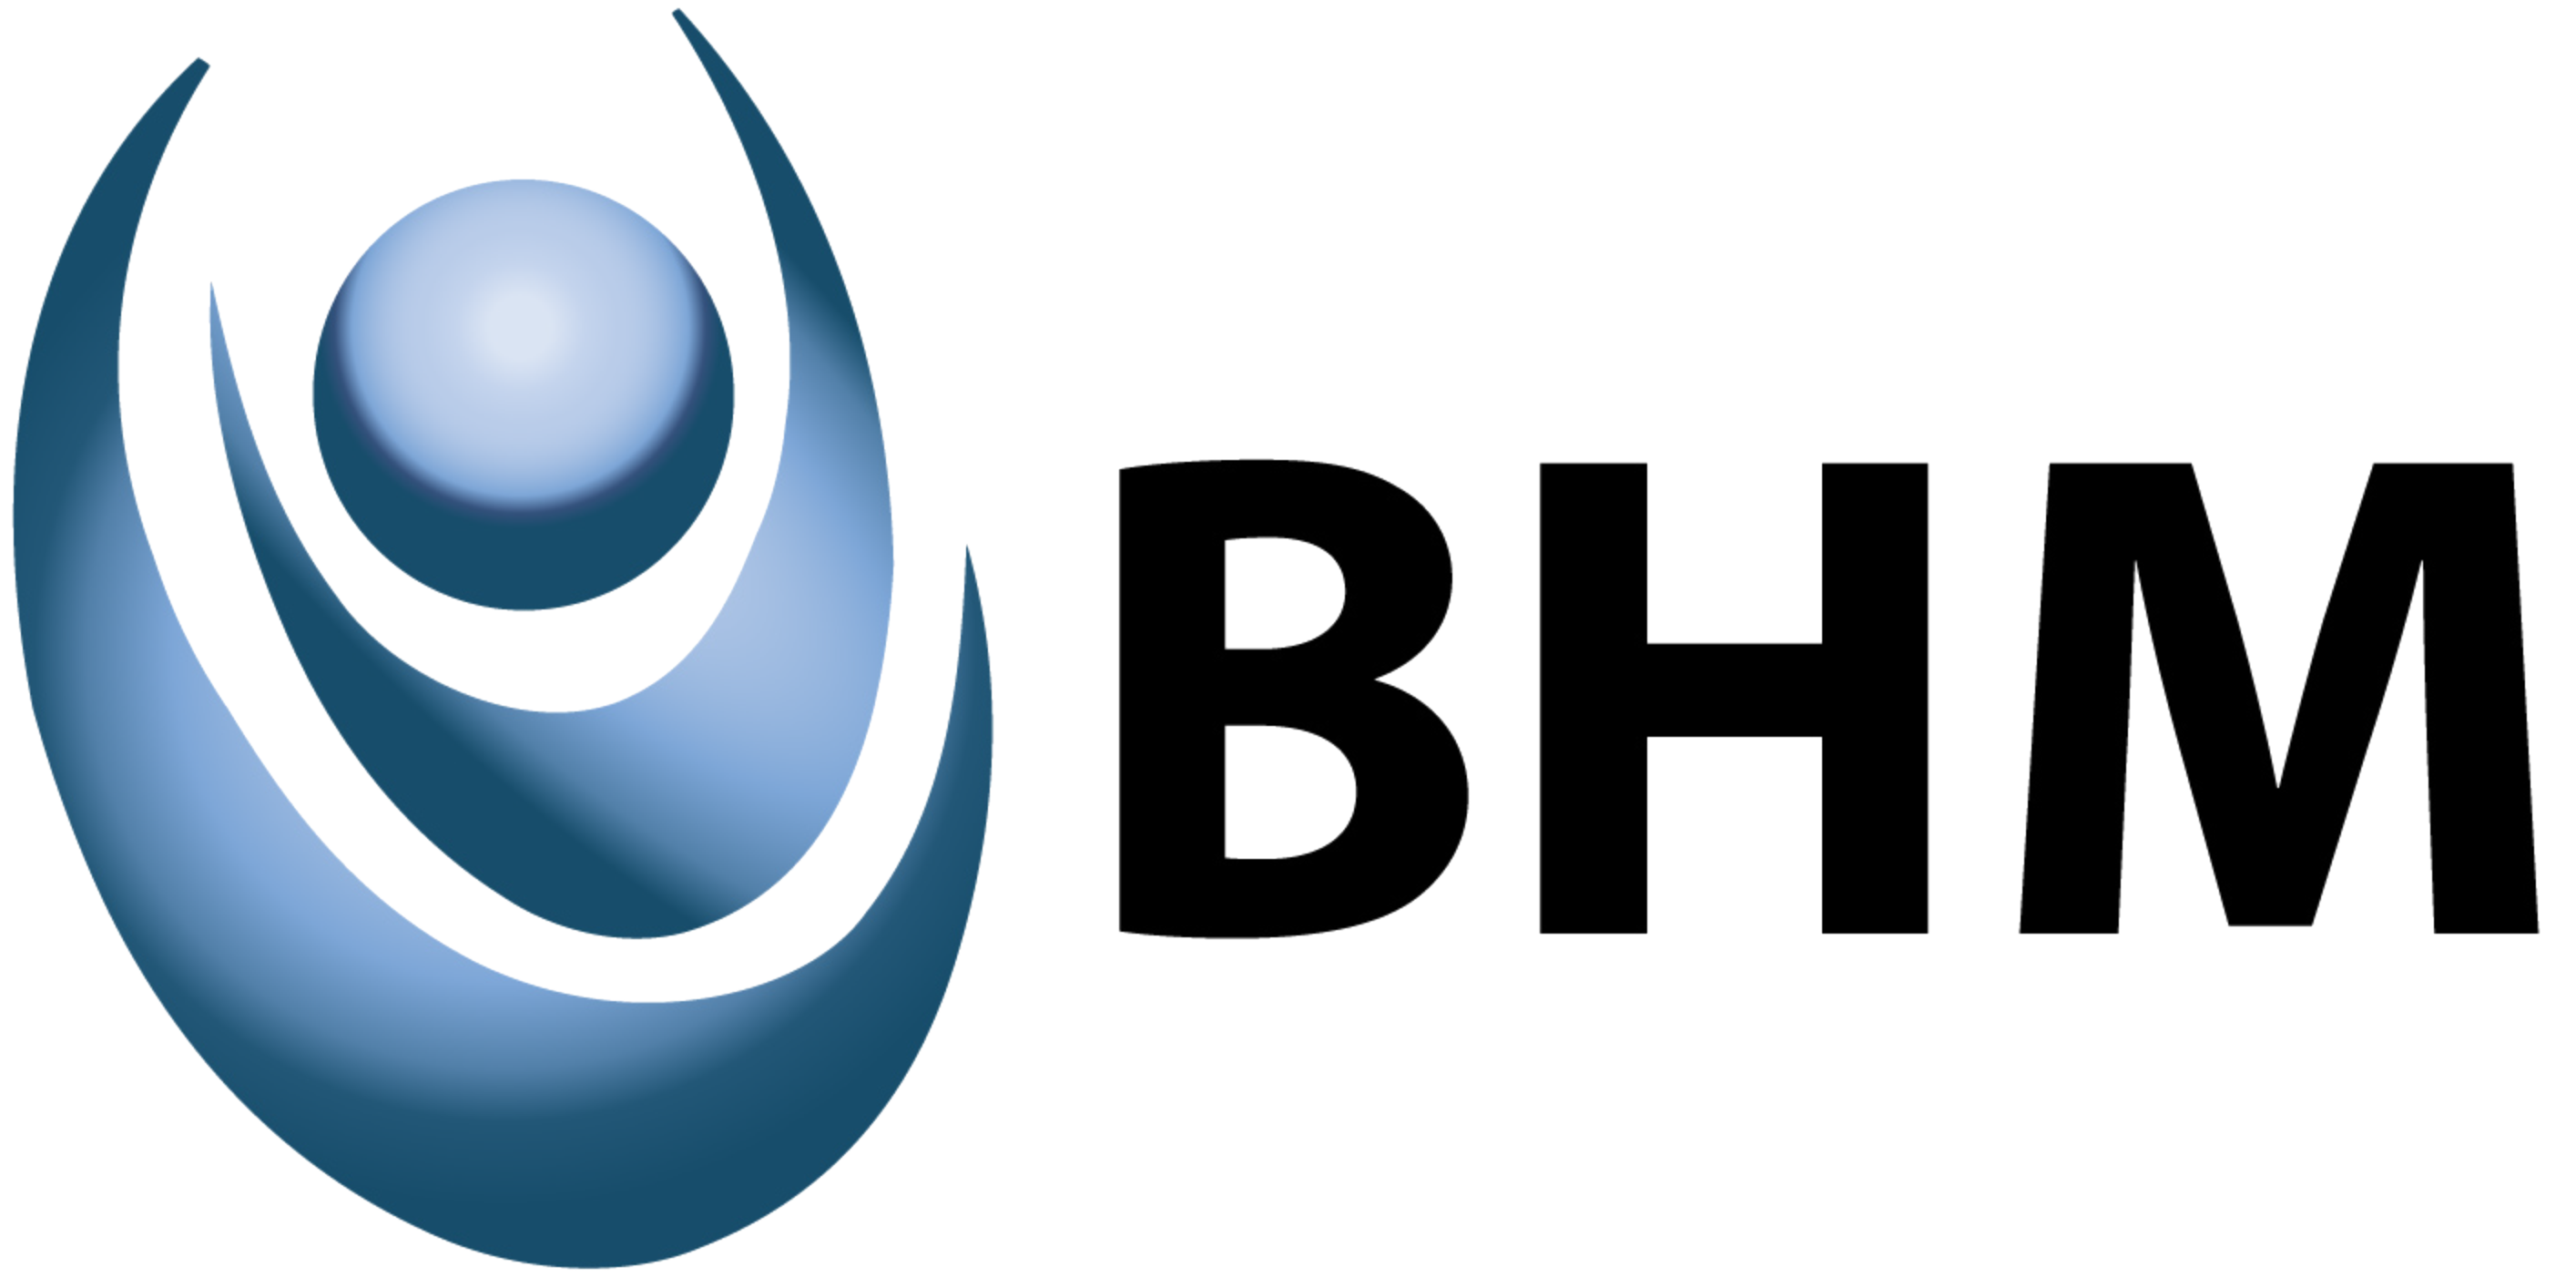 BHM Healthcare Solutions